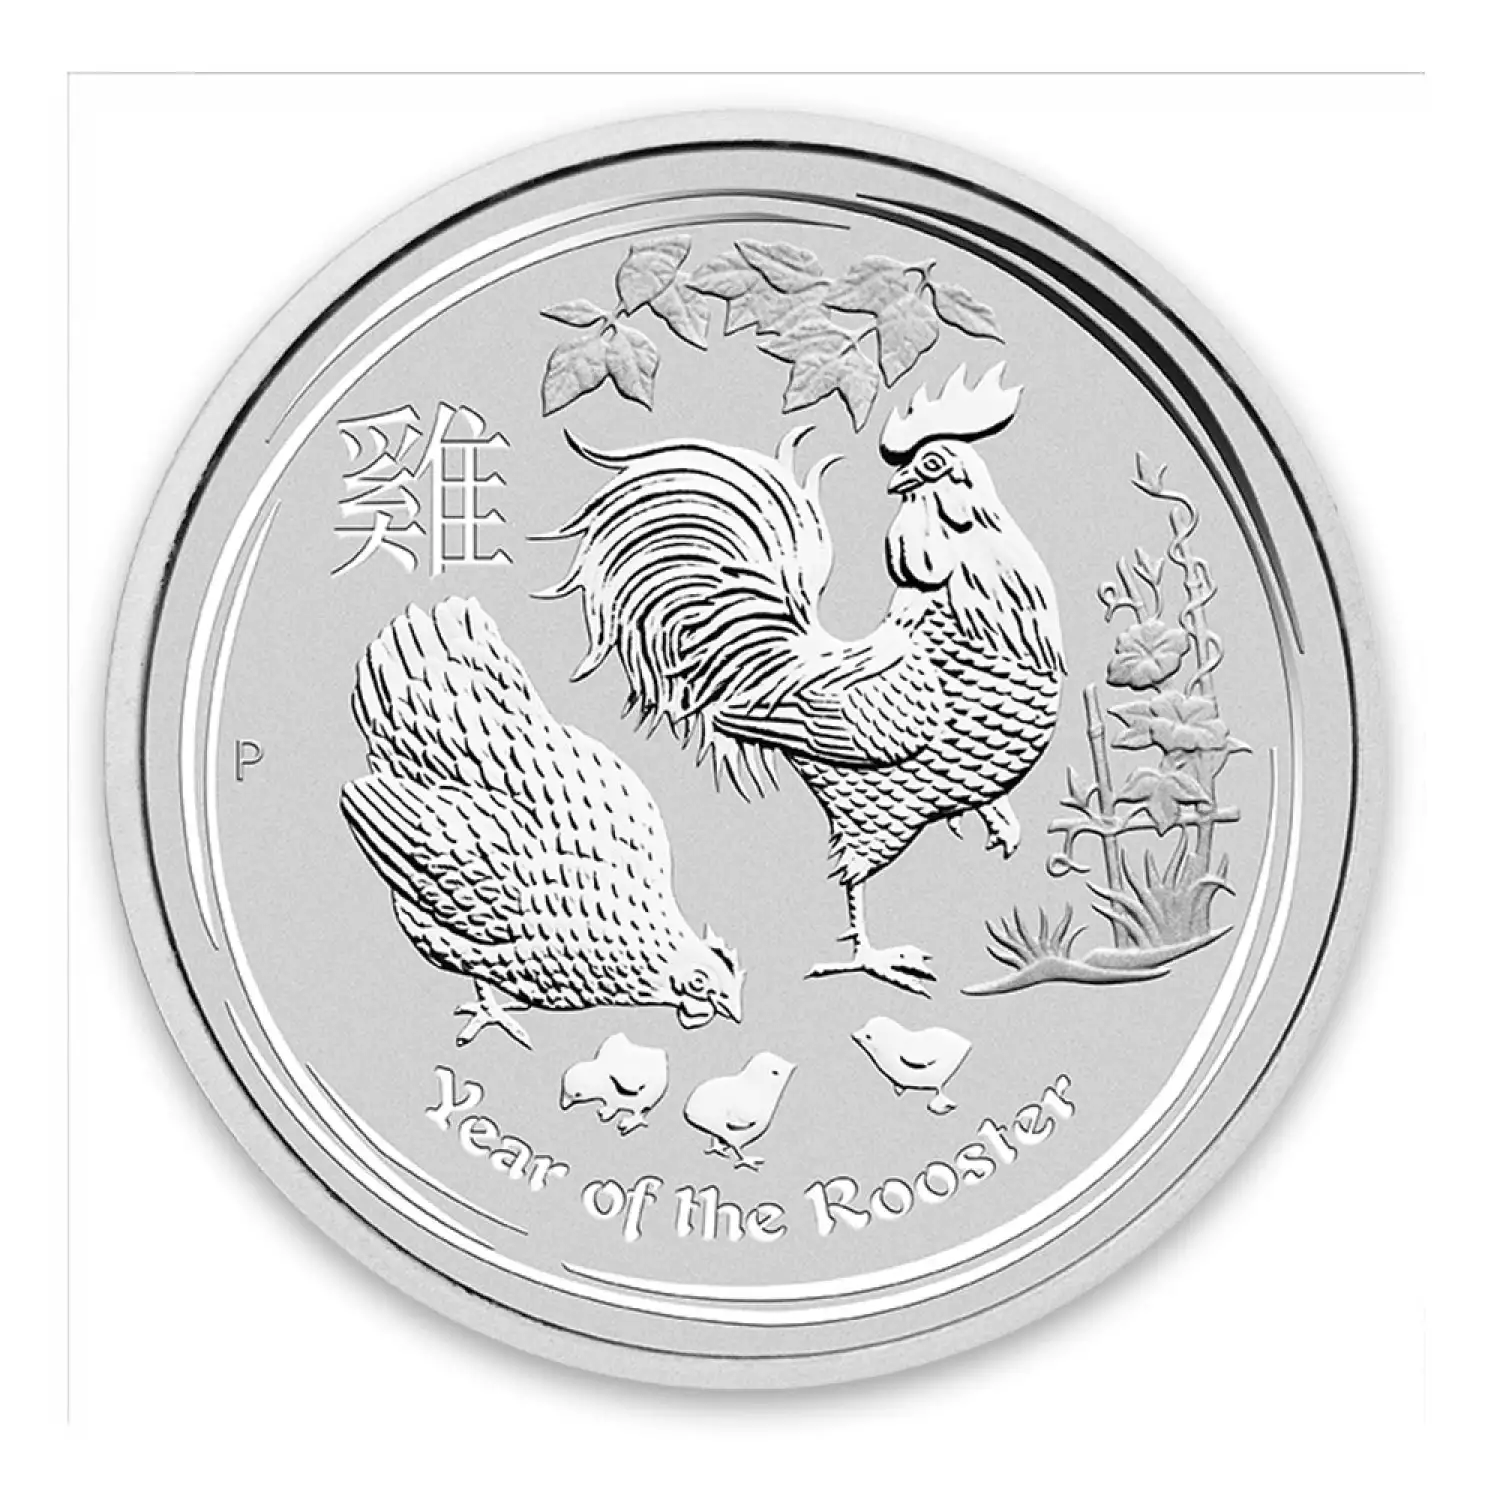 2017 1/2oz Australian Perth Mint Silver Lunar II: Year of the Rooster (2)